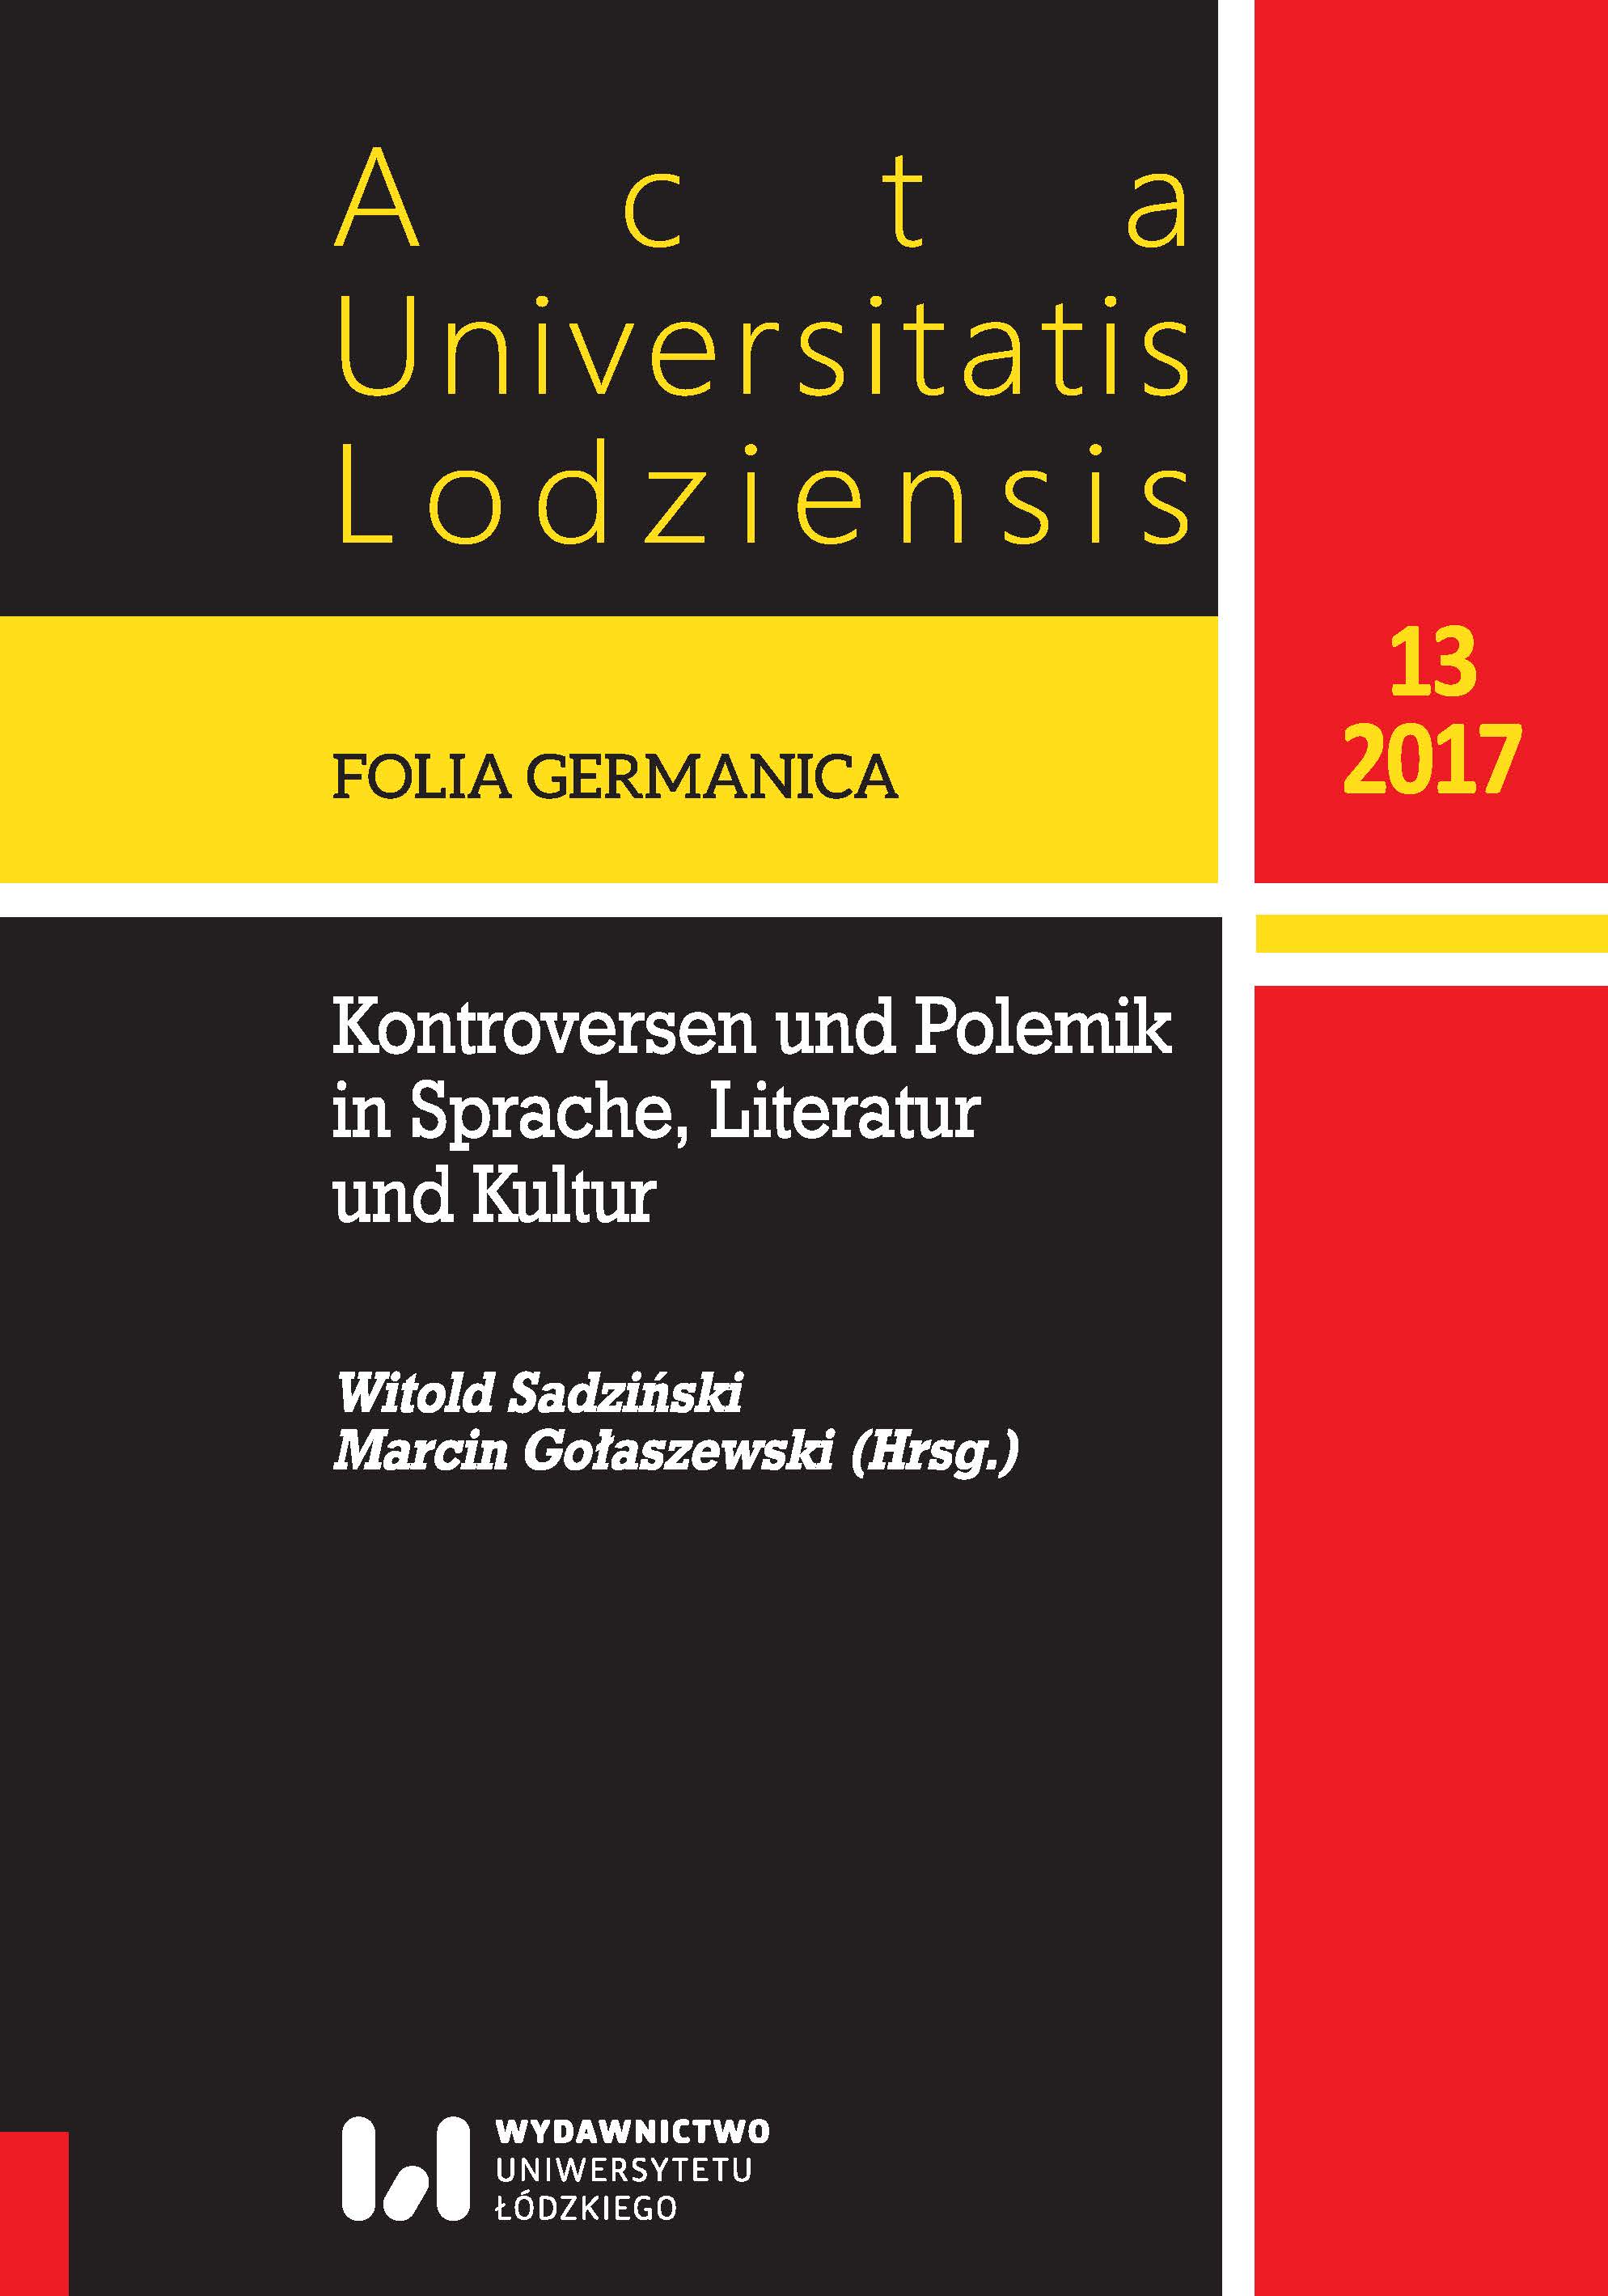 Colonies and Workers’ Settlements in the Memories of the Germens in Lodz Cover Image